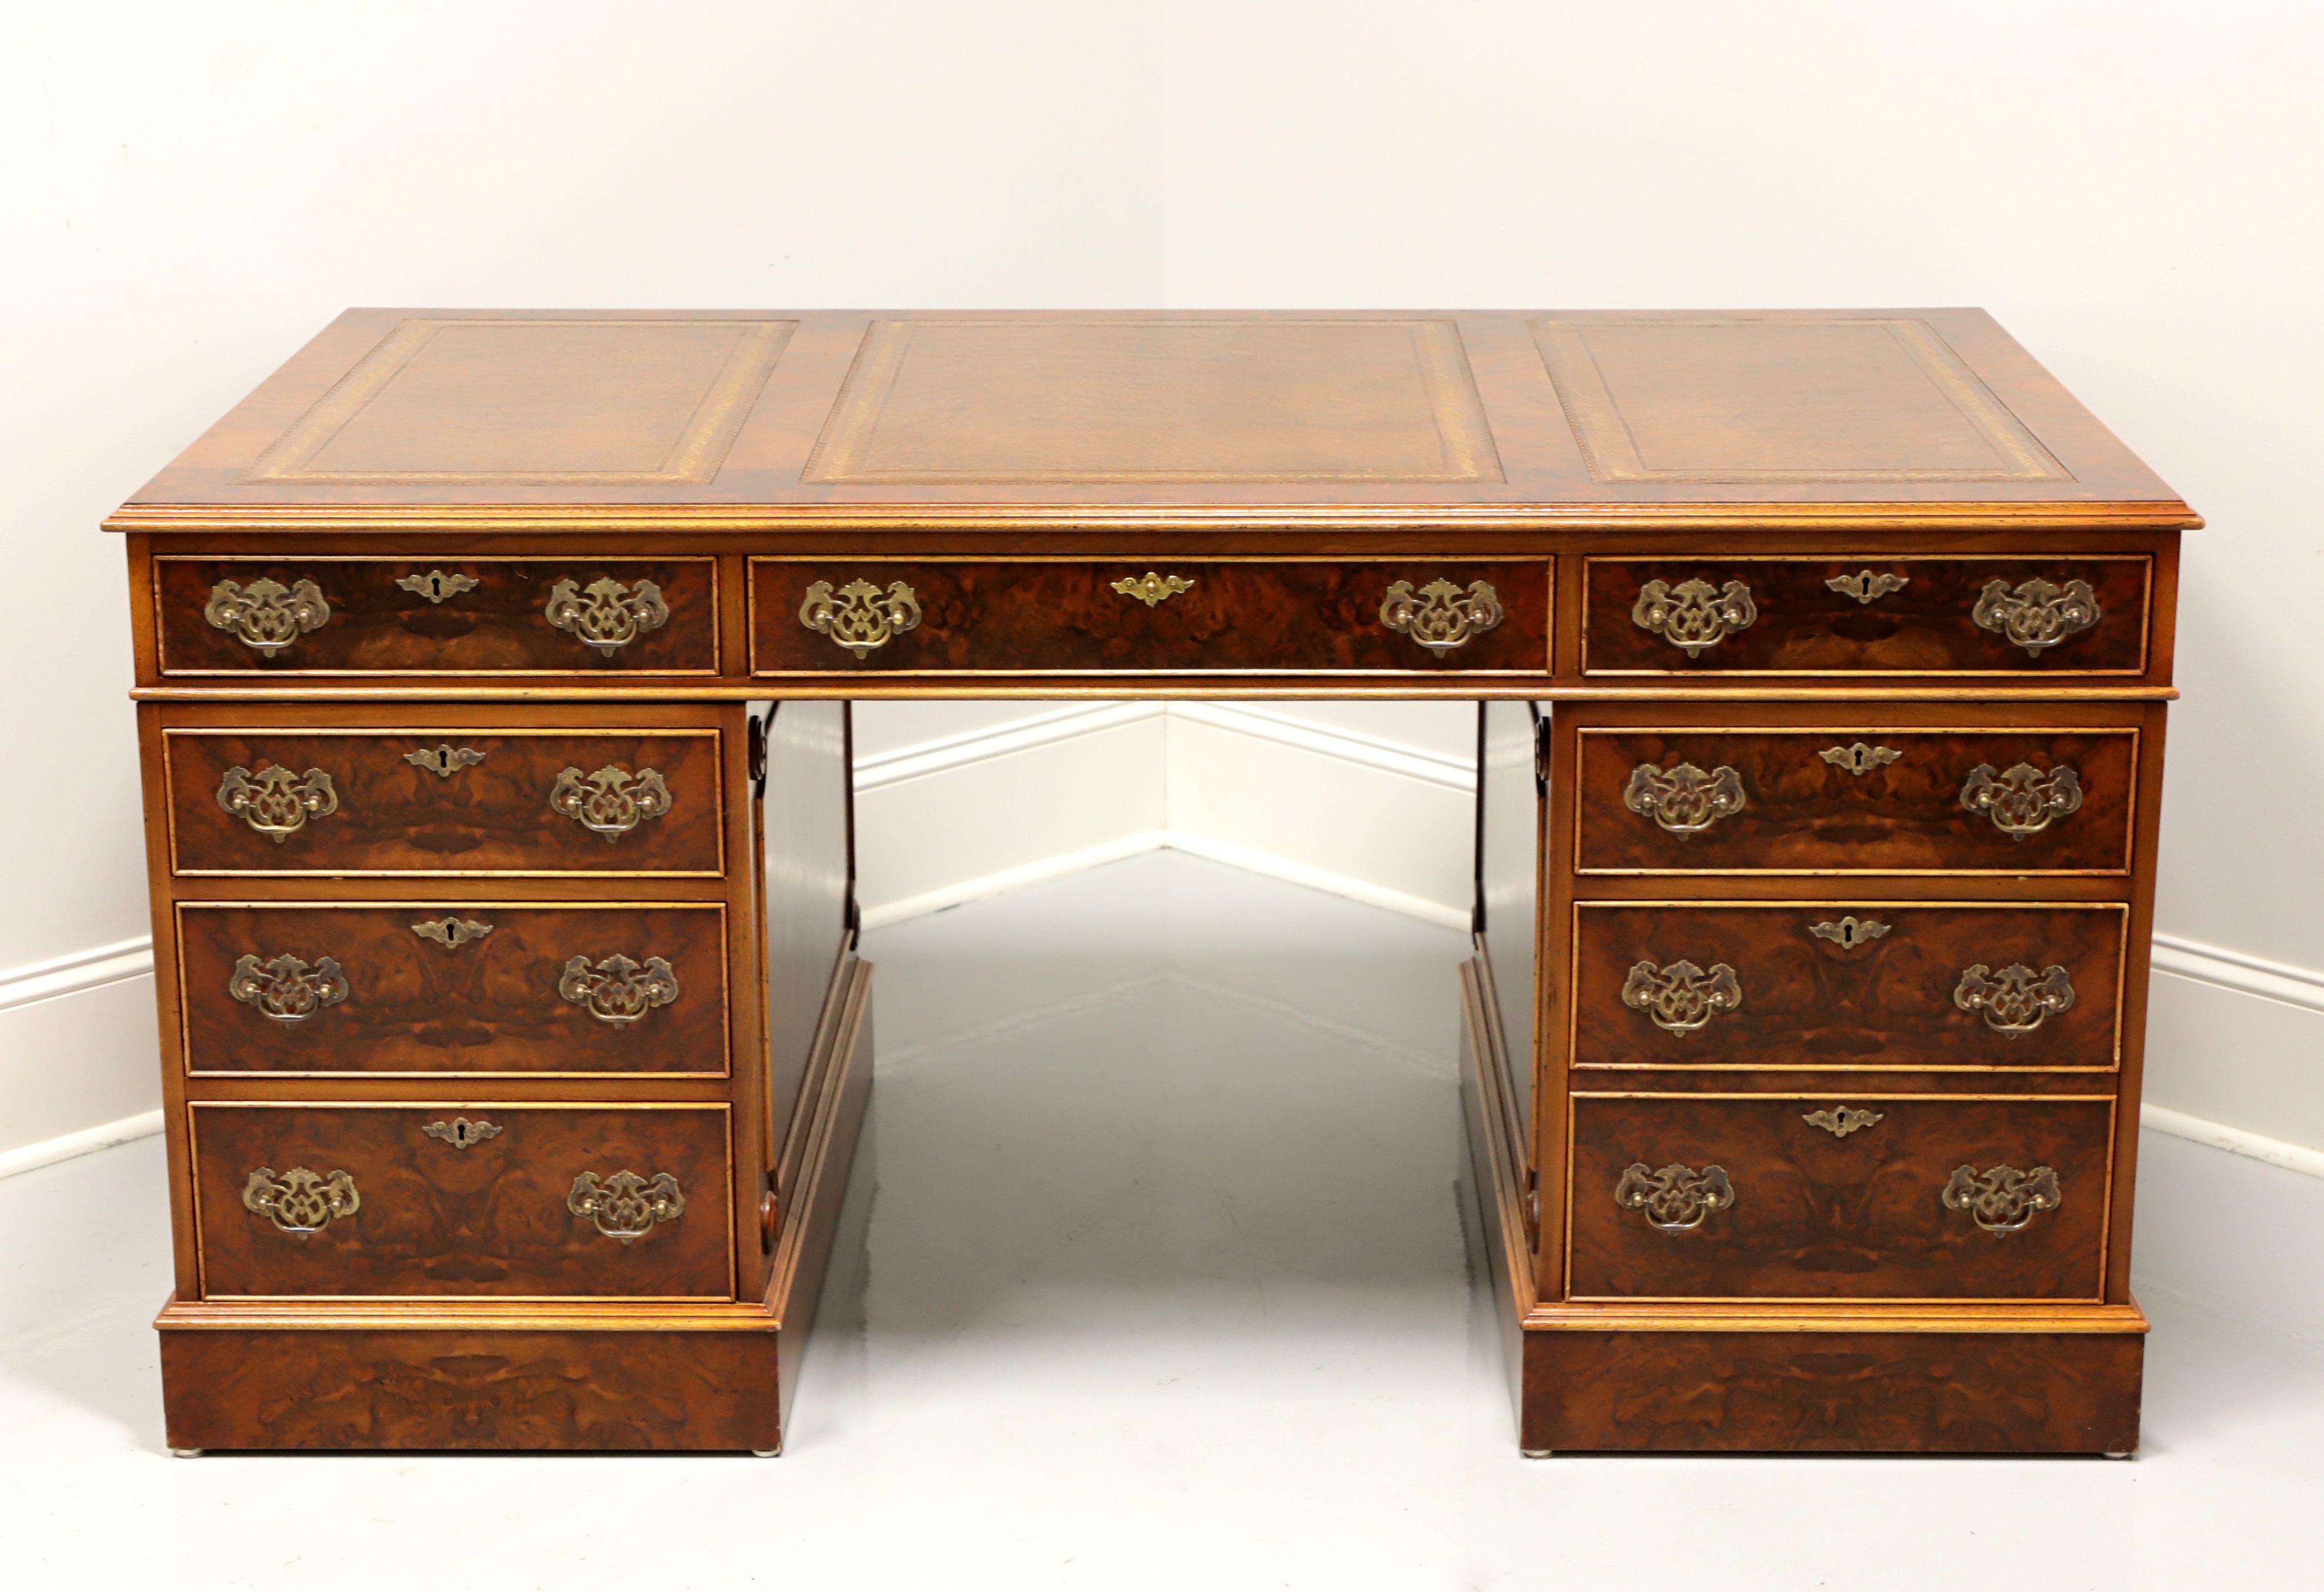 A Traditional style double pedestal executive desk, unbranded. Burlwood with inlaid mahogany, tooled leather top and brass hardware. The user side of the desk features eight lockable drawers of dovetail construction, including one longer center